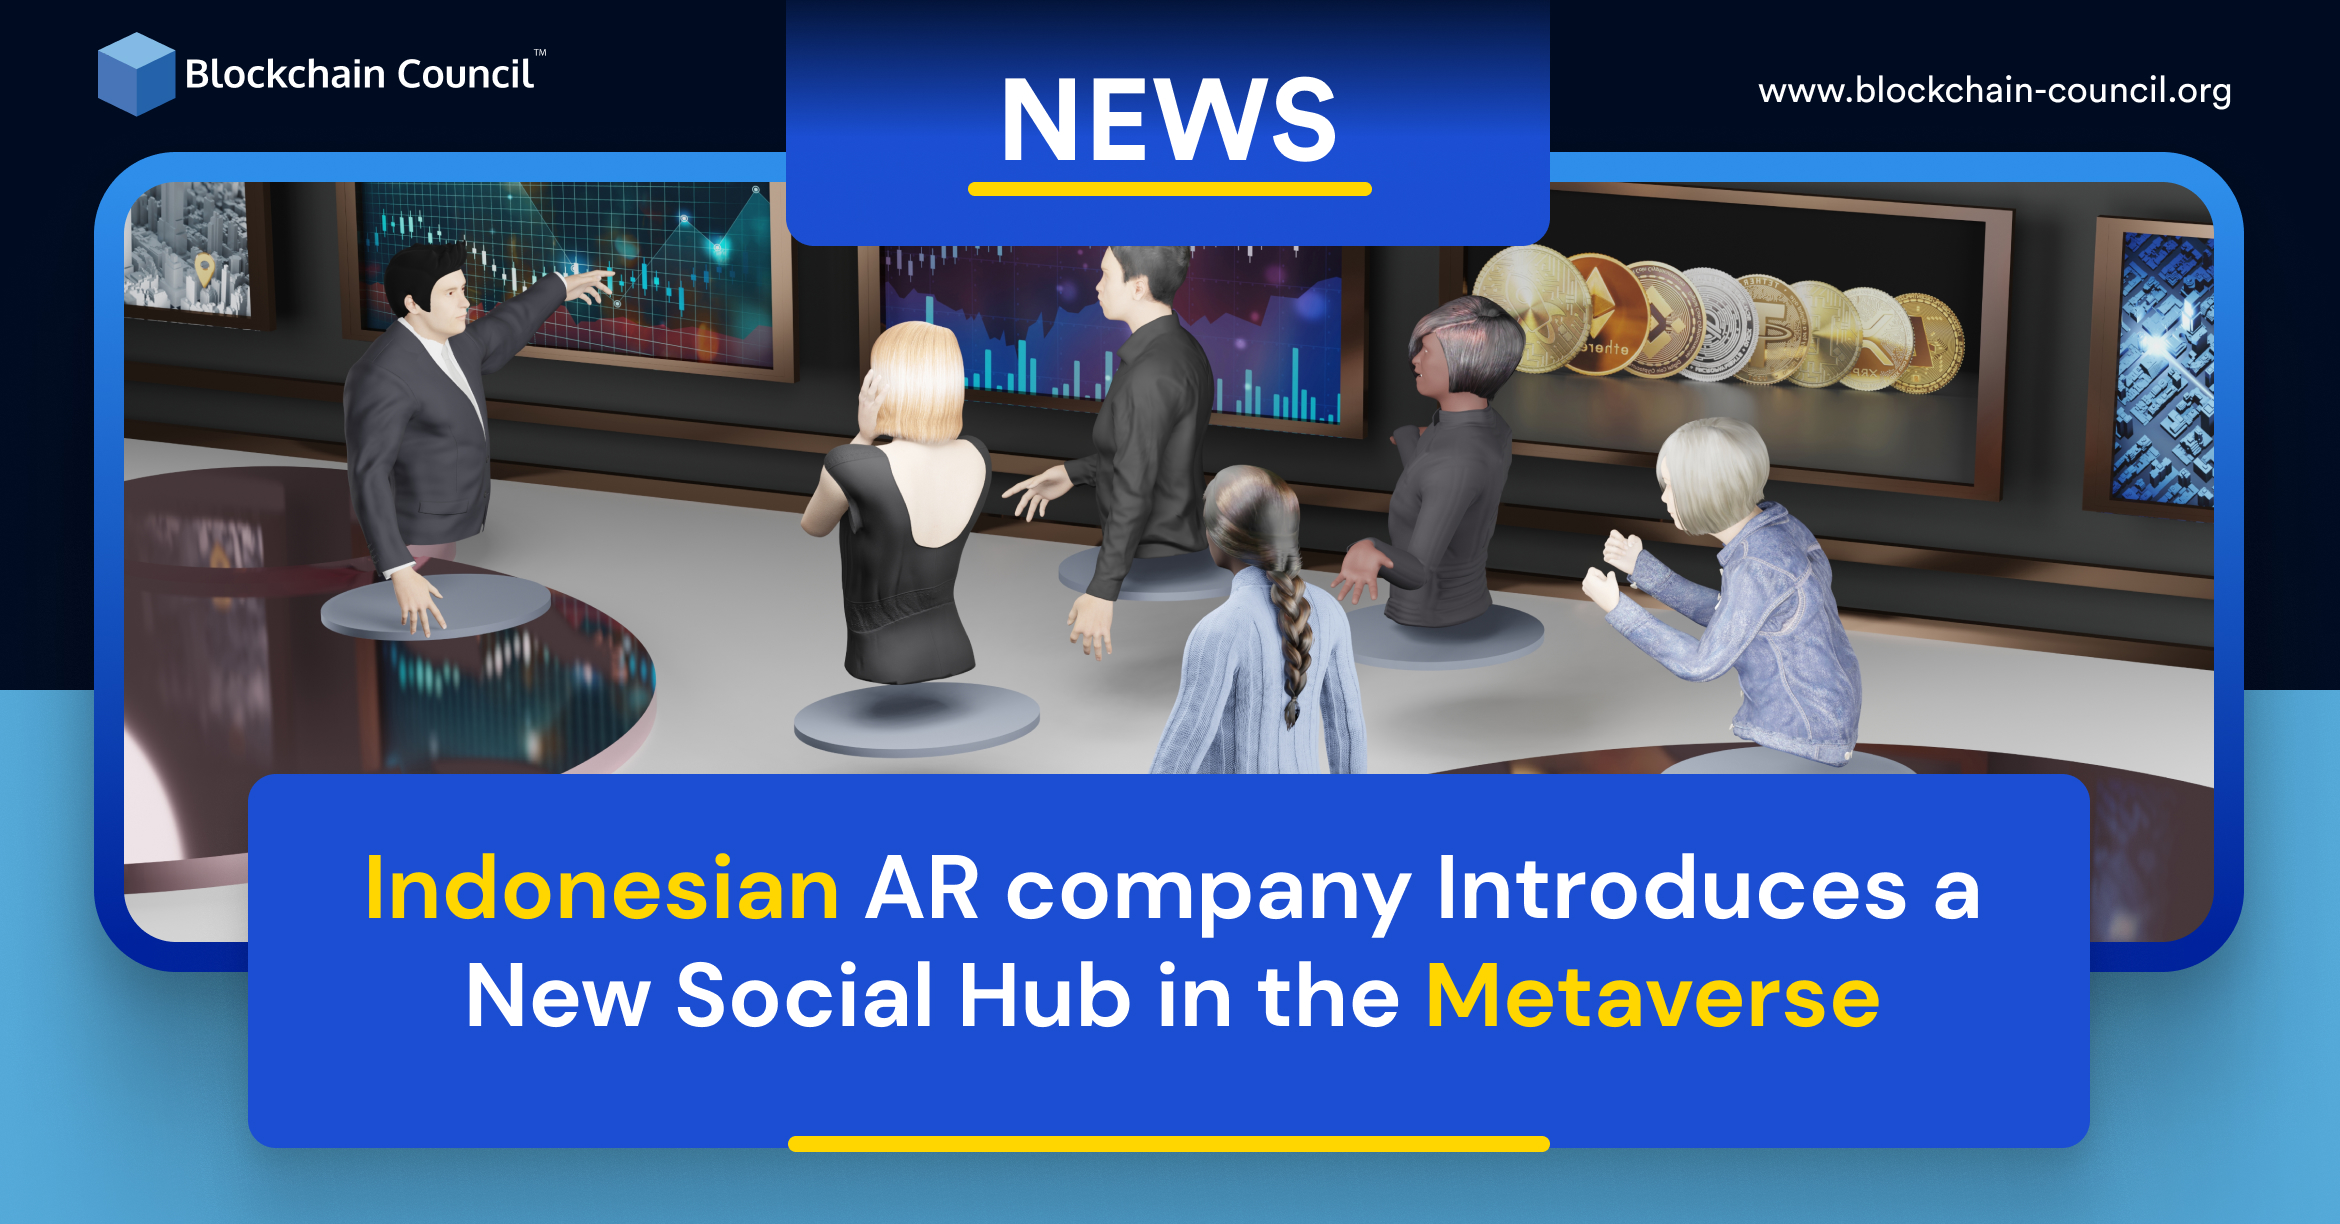 Indonesian AR company Introduces a New Social Hub in the Metaverse